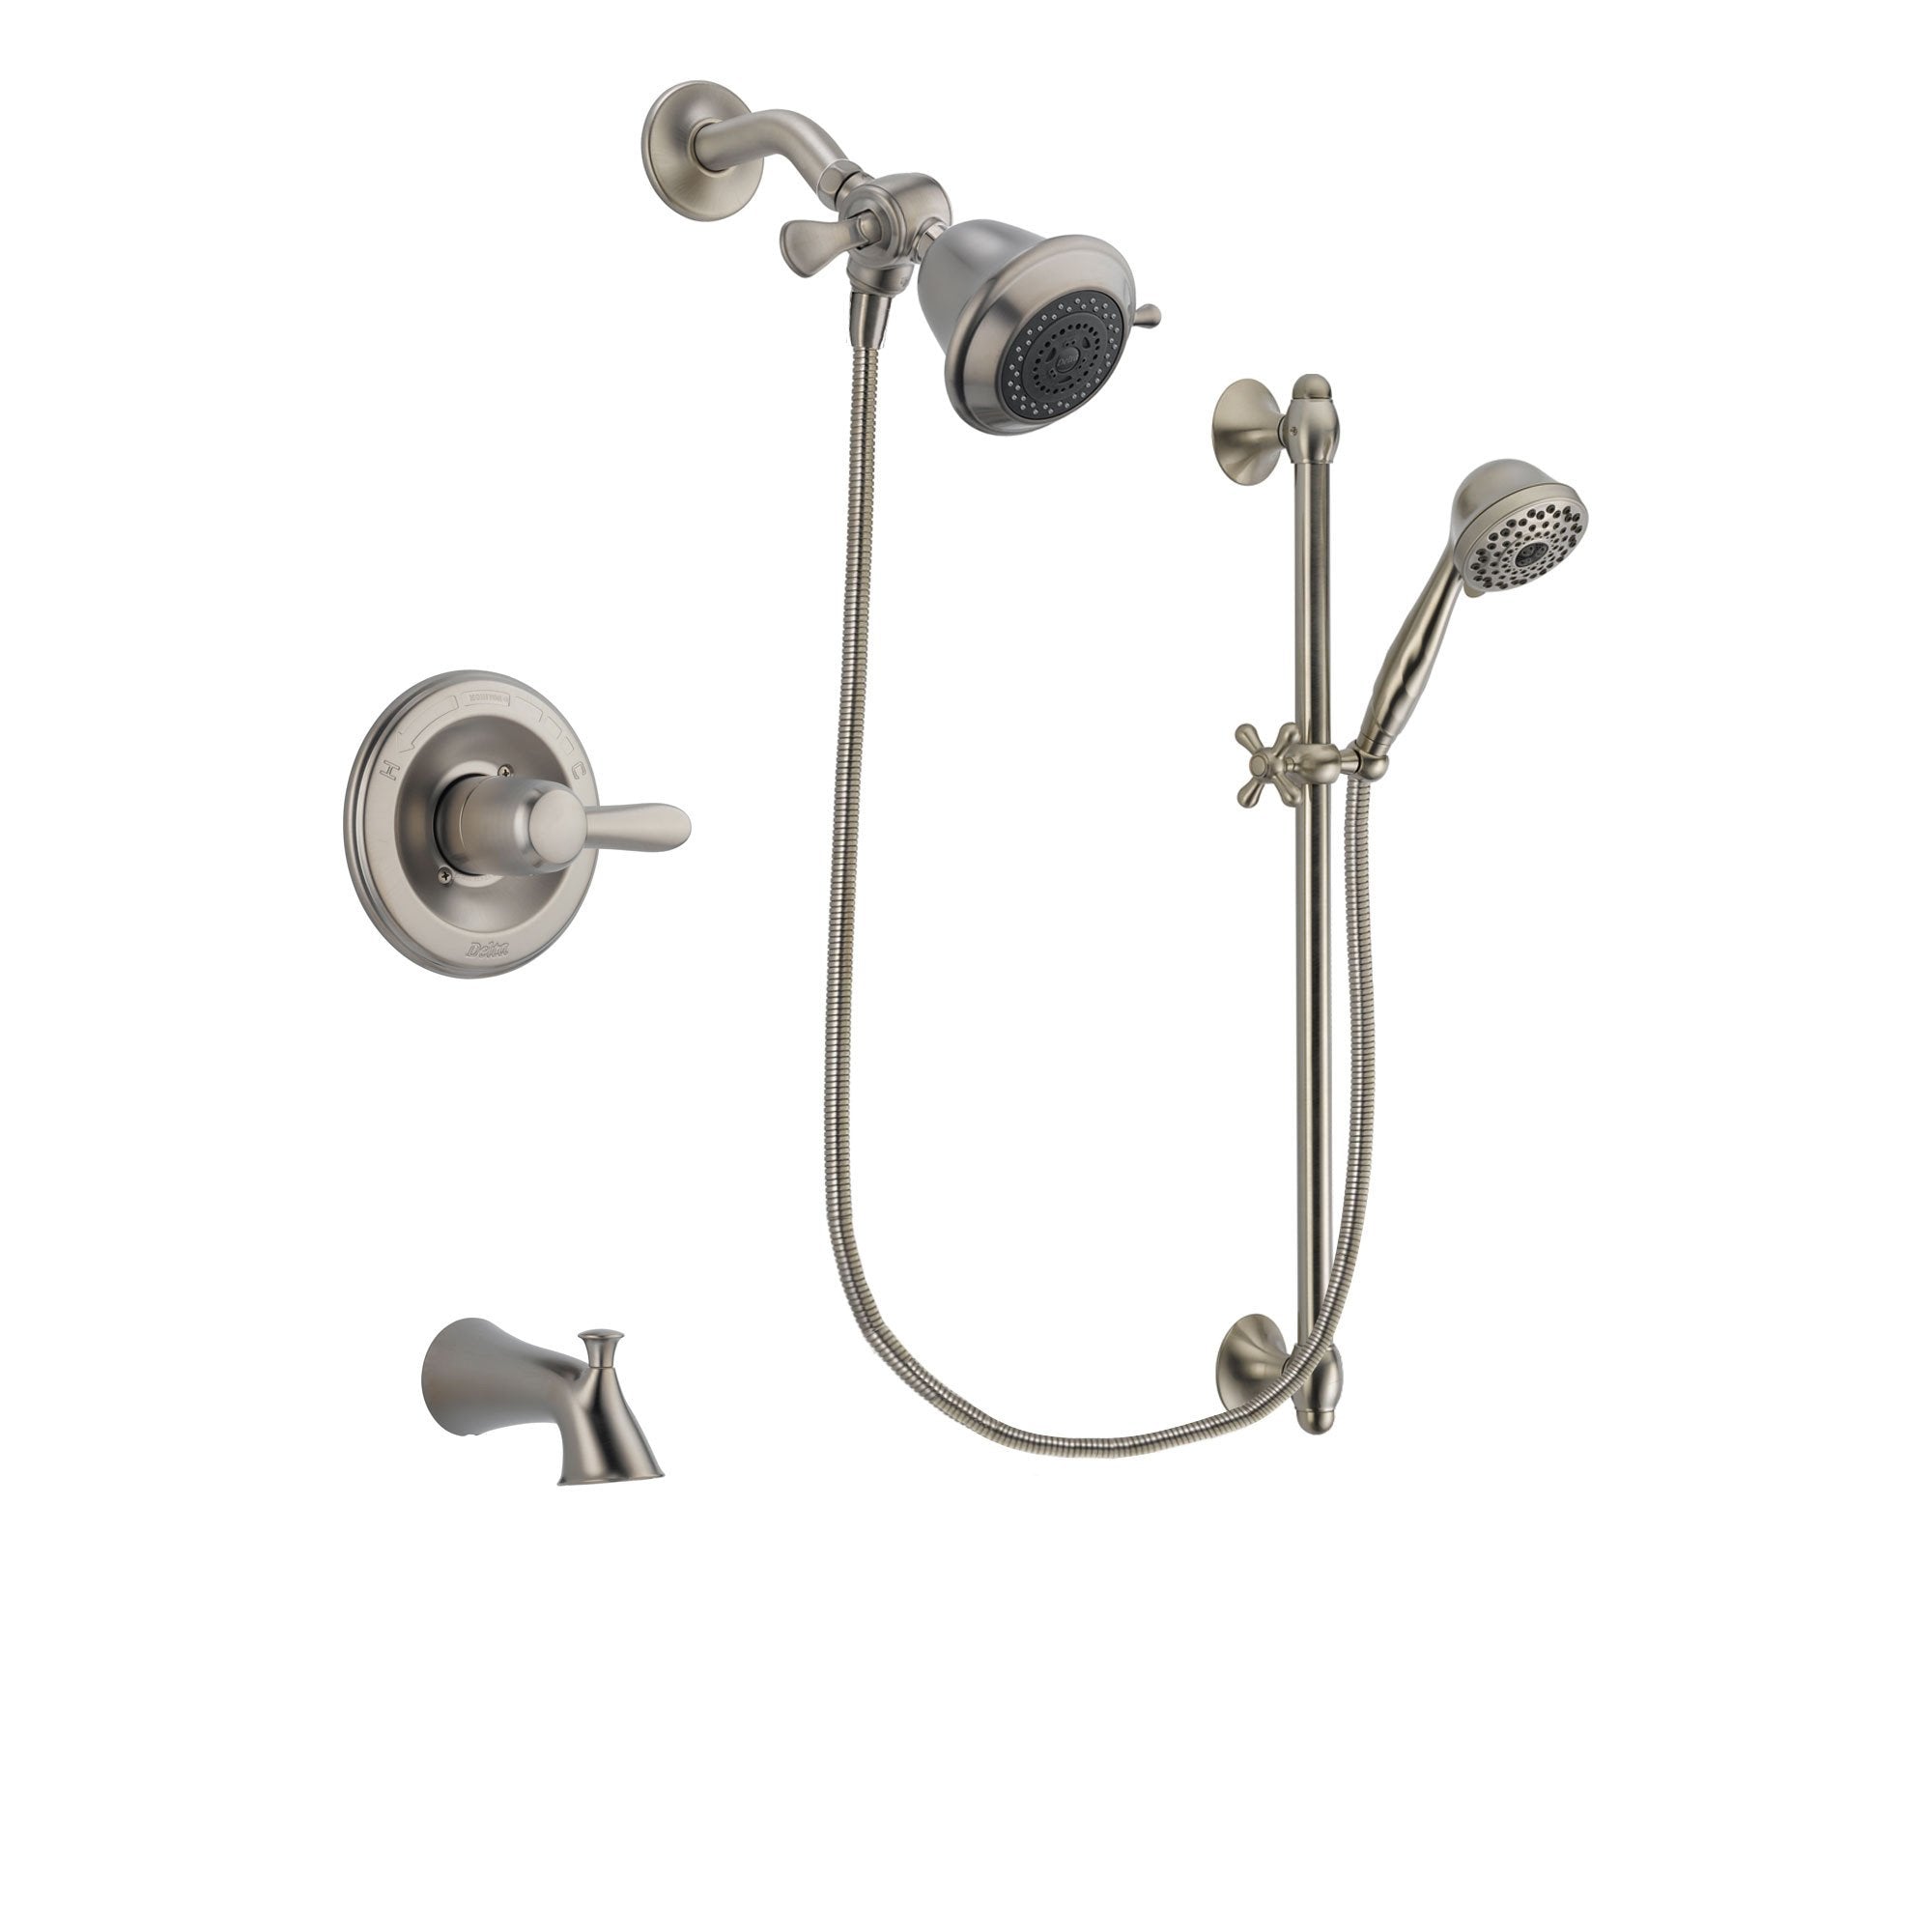 Delta Lahara Stainless Steel Finish Tub and Shower Faucet System Package with Shower Head and 7-Spray Handheld Shower with Slide Bar Includes Rough-in Valve and Tub Spout DSP1659V